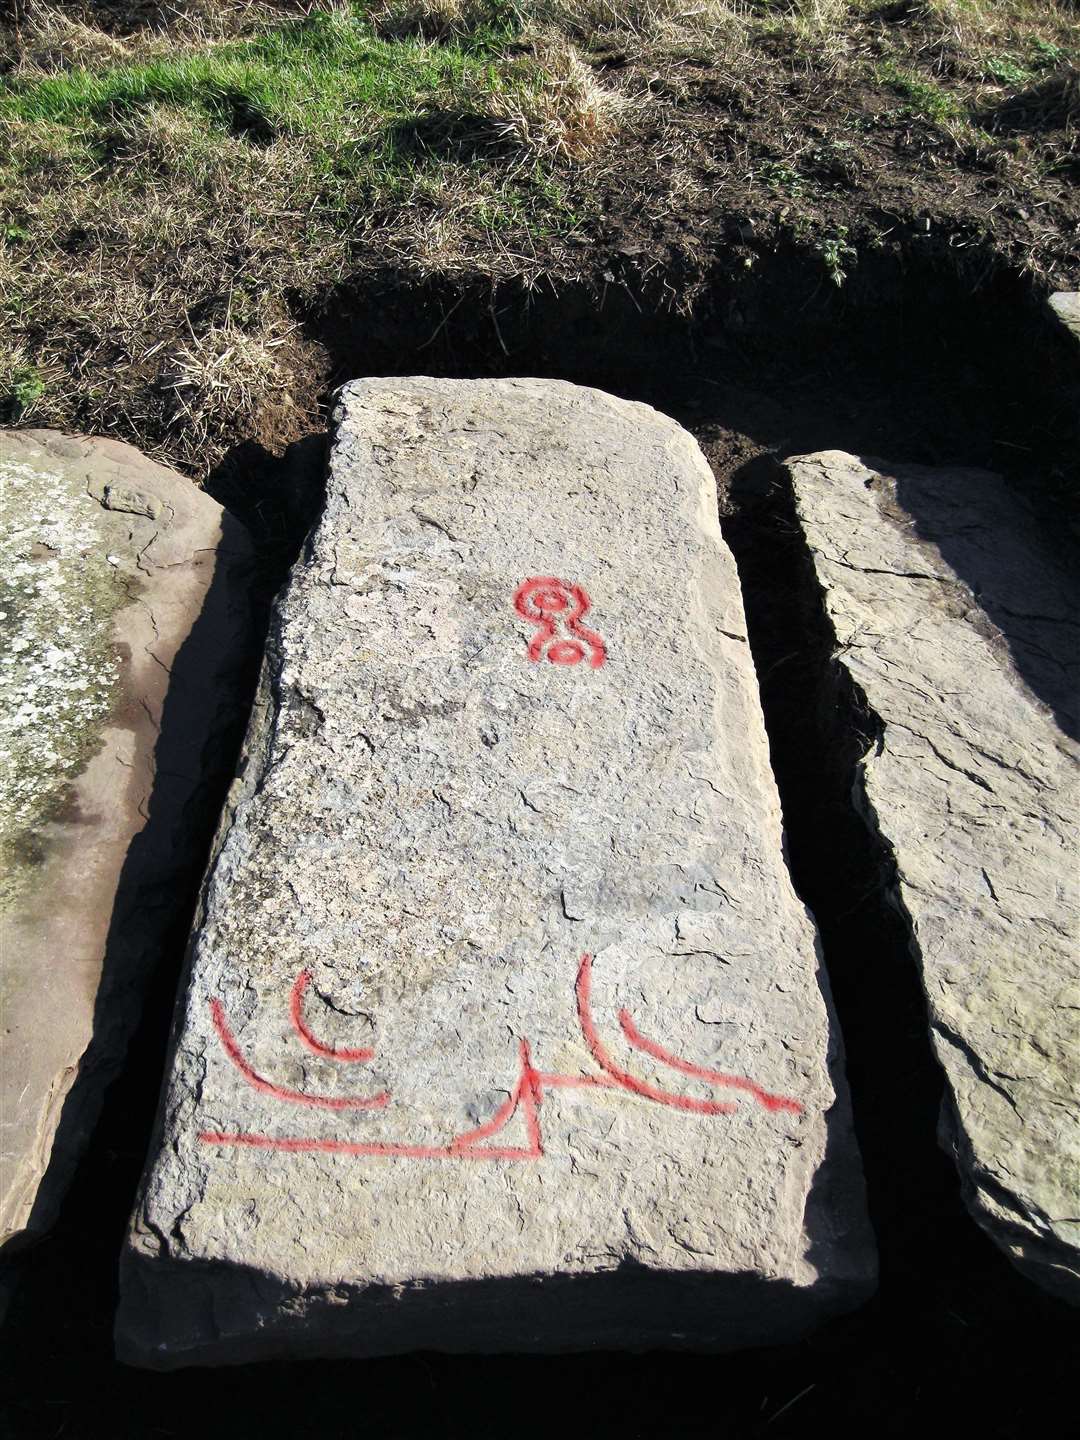 The slab's markings highlighted in red. Some of the lines are covered with lichens and will hopefully be clearer after restoration work is carried out. The area near the bottom appears to show a double disc and z-rod often seen in inscribed Pictish stones.